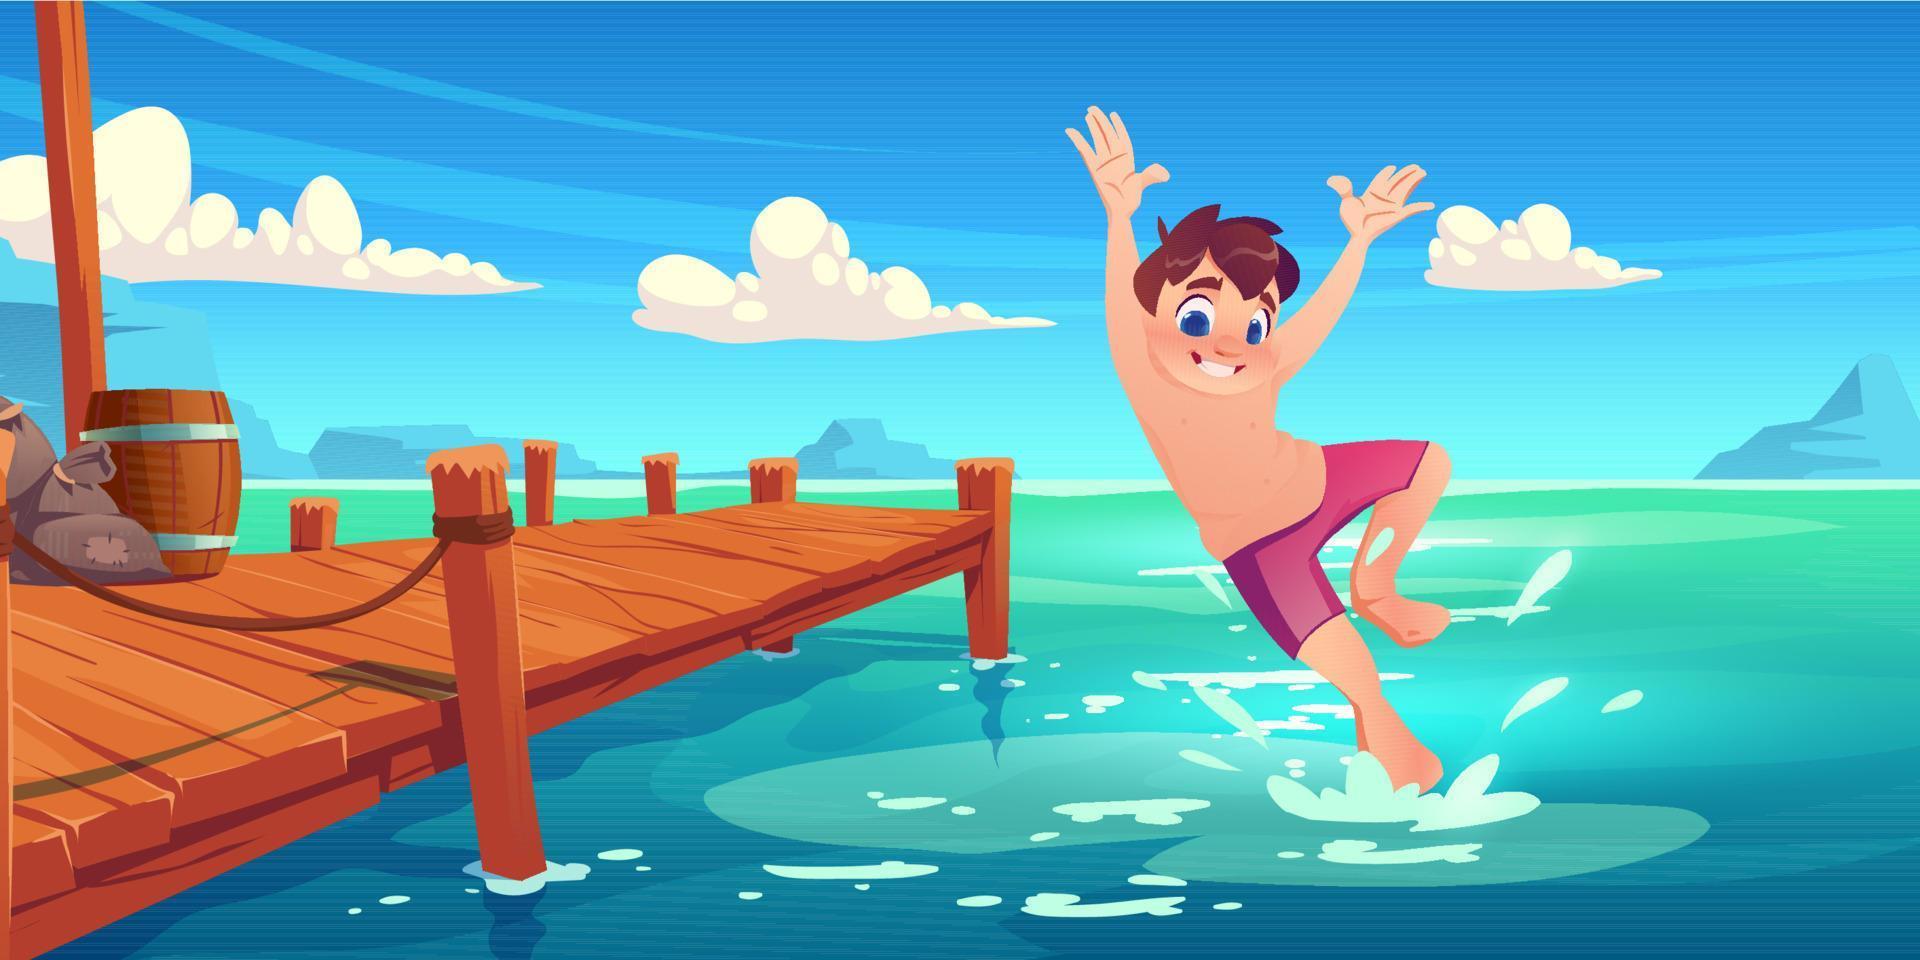 Happy boy jump into lake water from wooden pier, vector